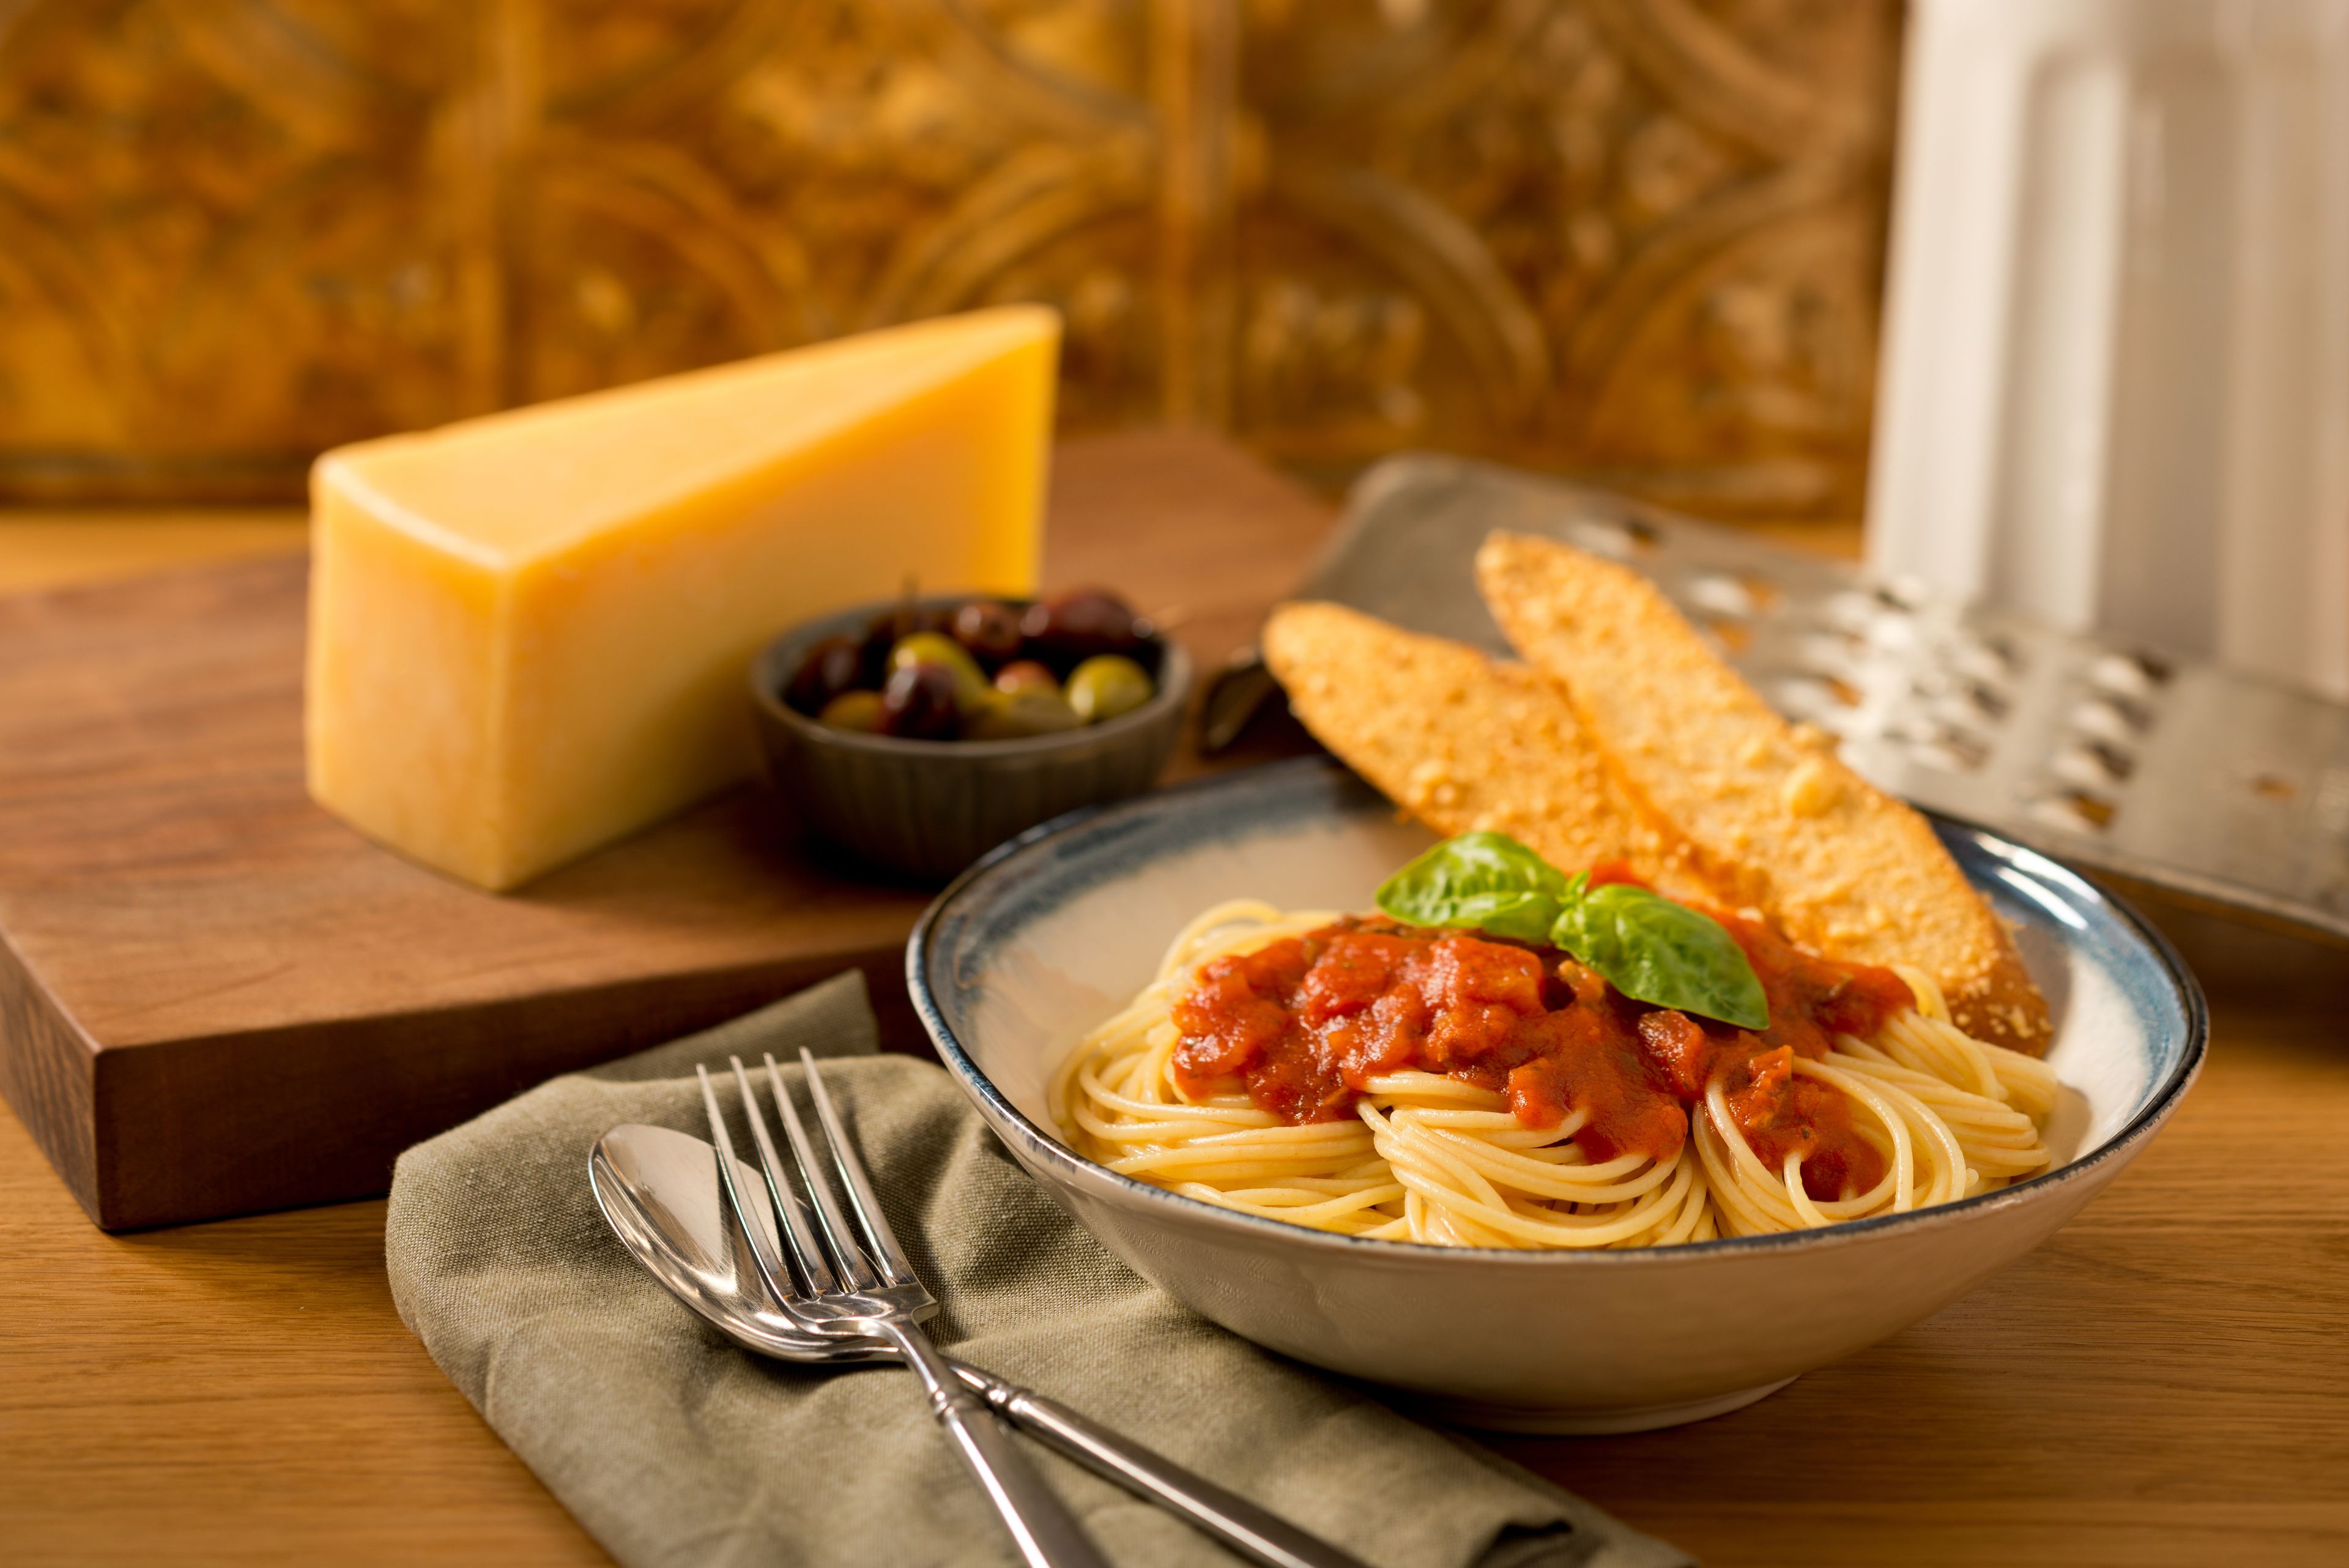 Spaghetti, bread, and cheese for a pasta meal.